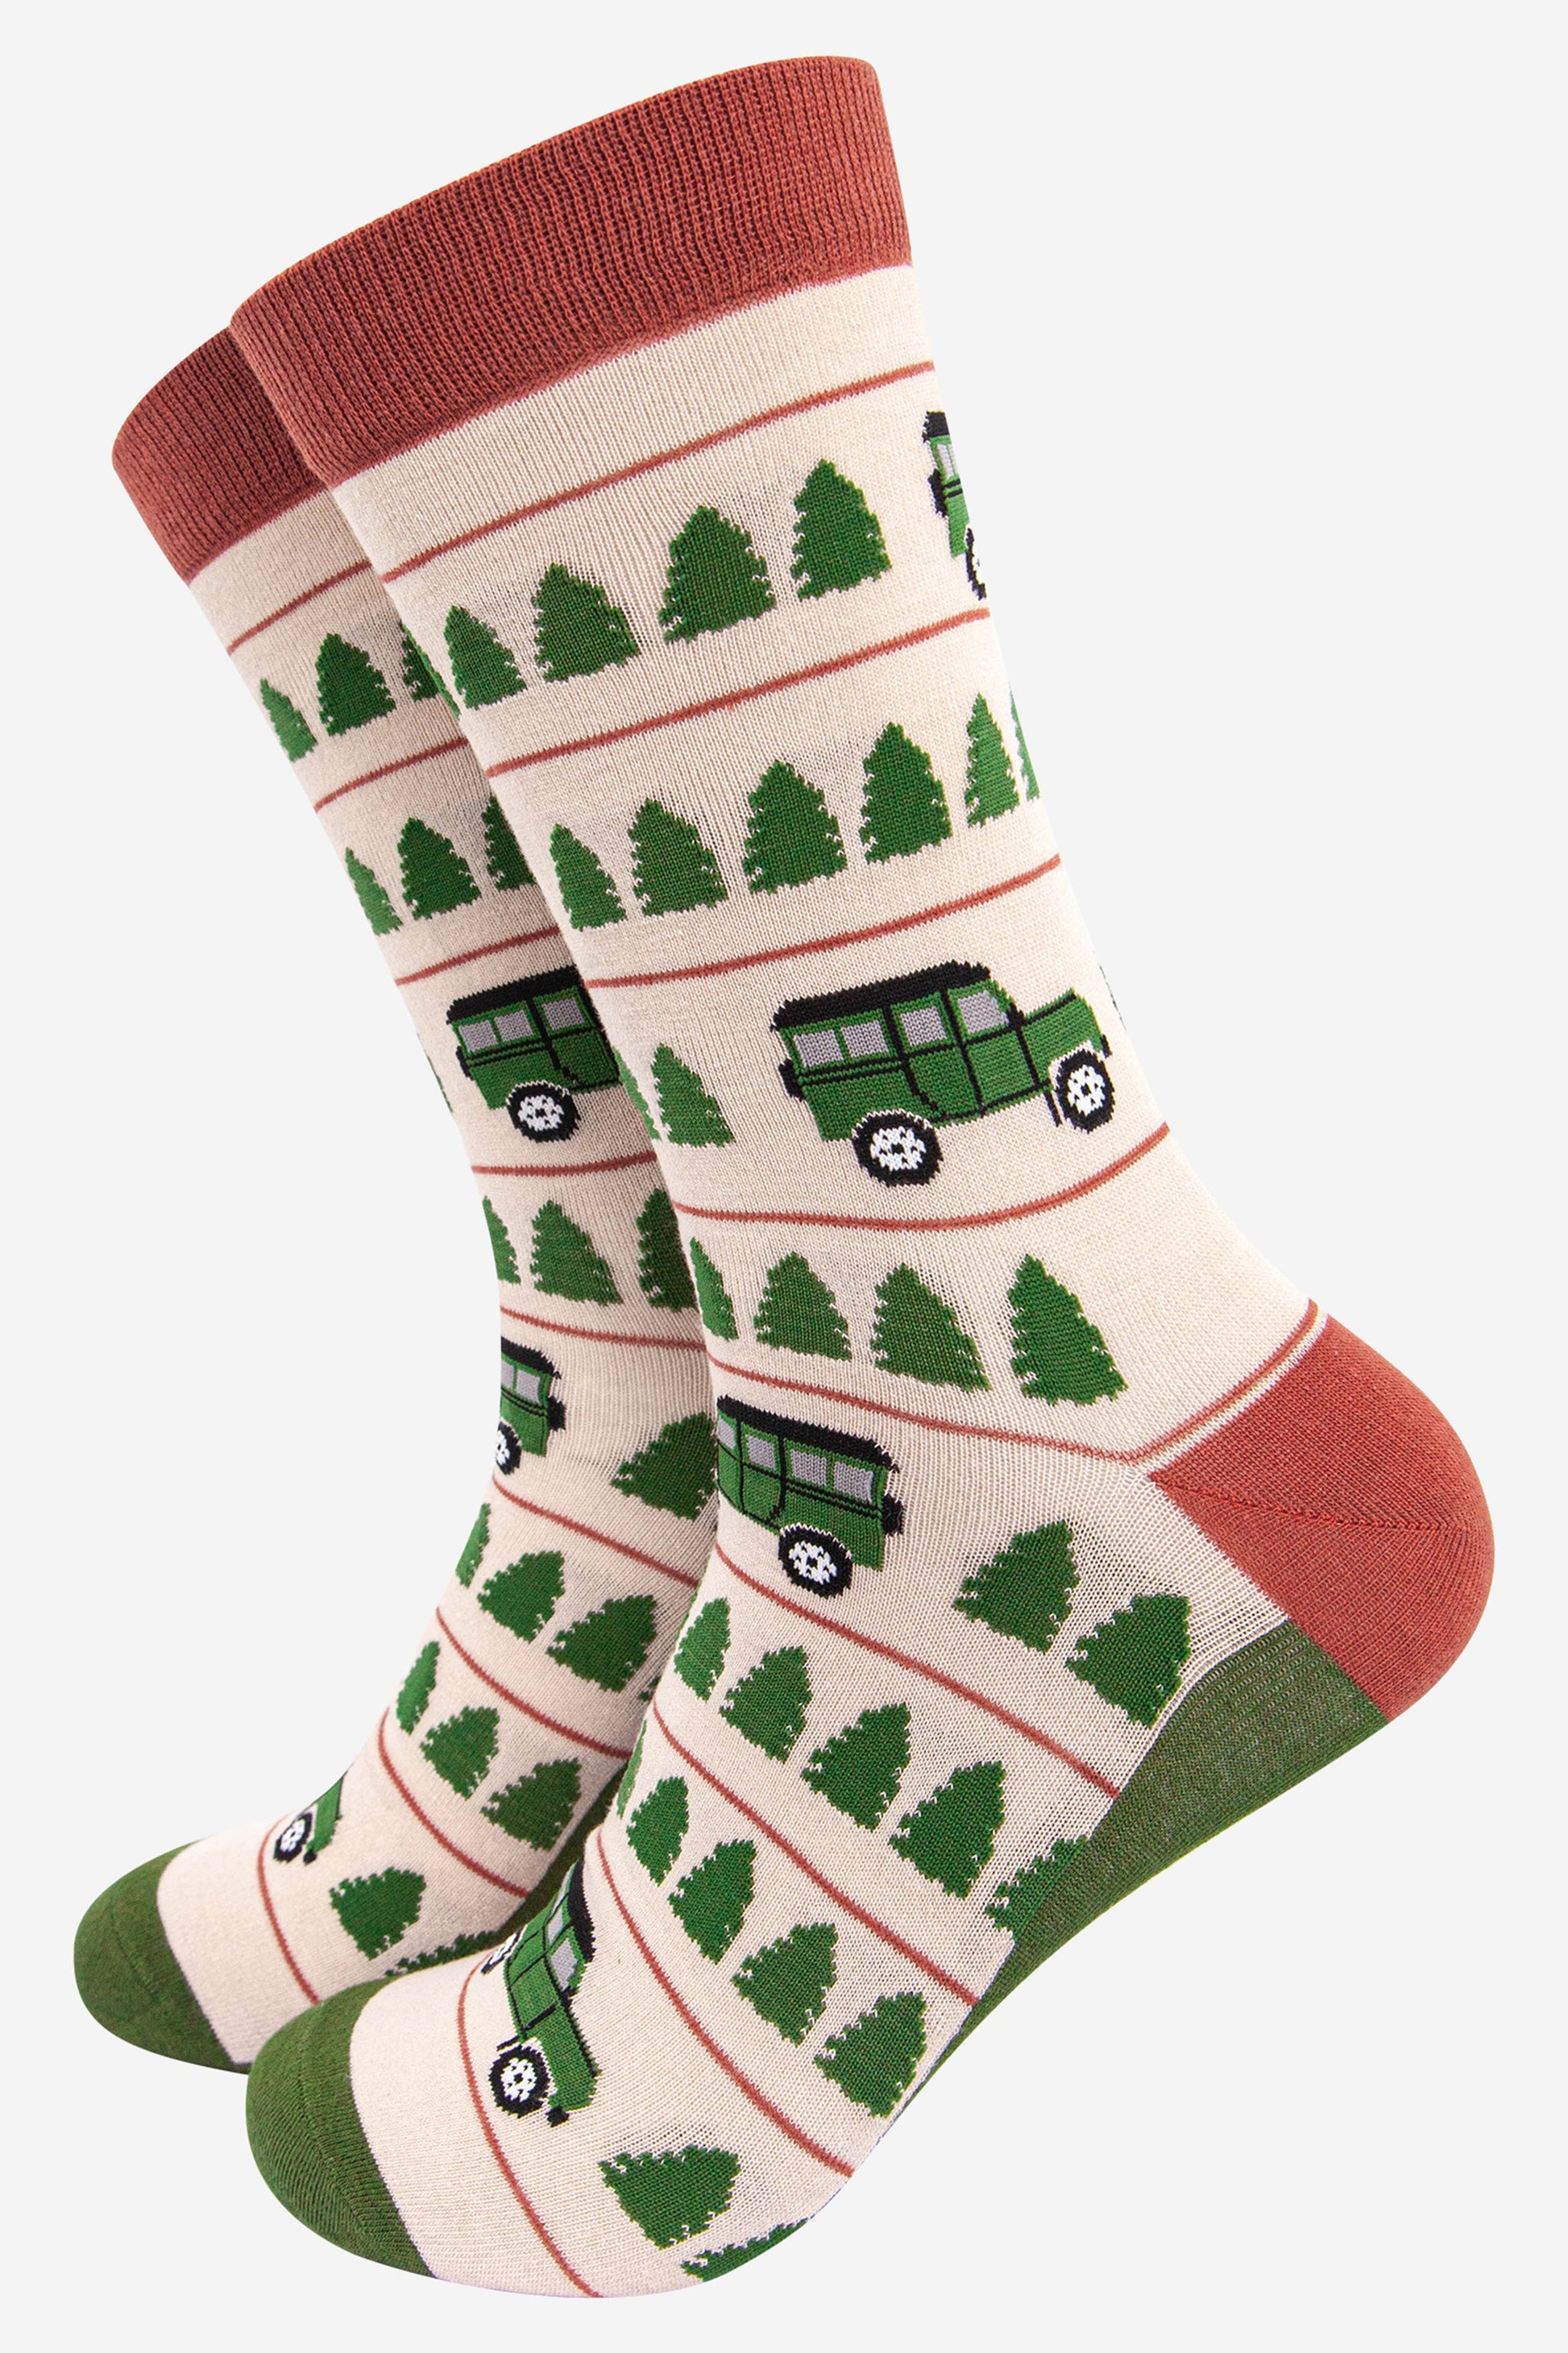 cream socks with a burnt orange cuff and heel with a green toe and sole and a pattern of green trees and jeep vehicles